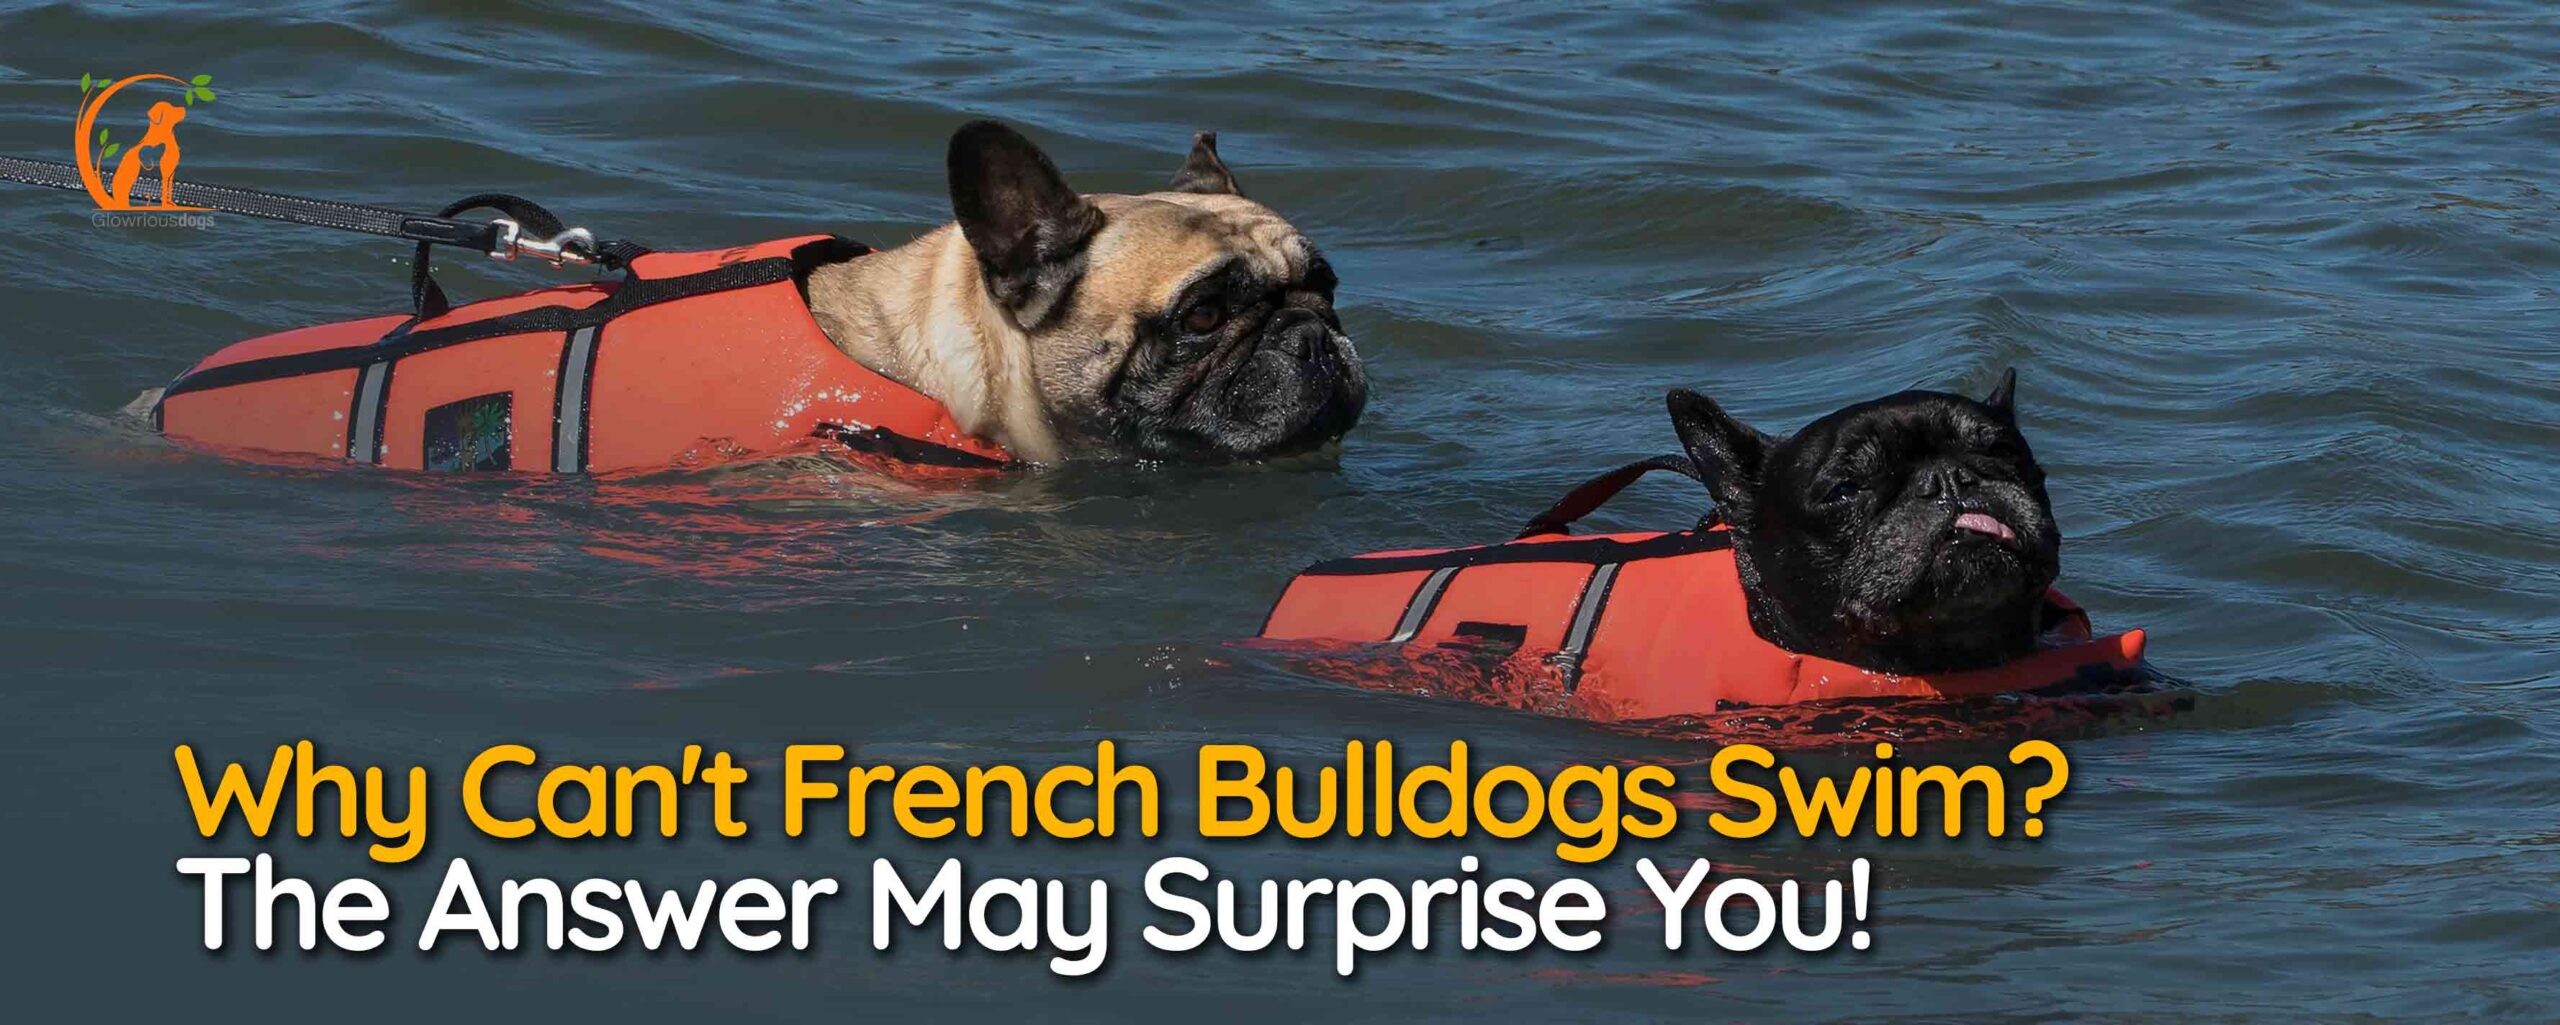 Why Can't French Bulldogs Swim